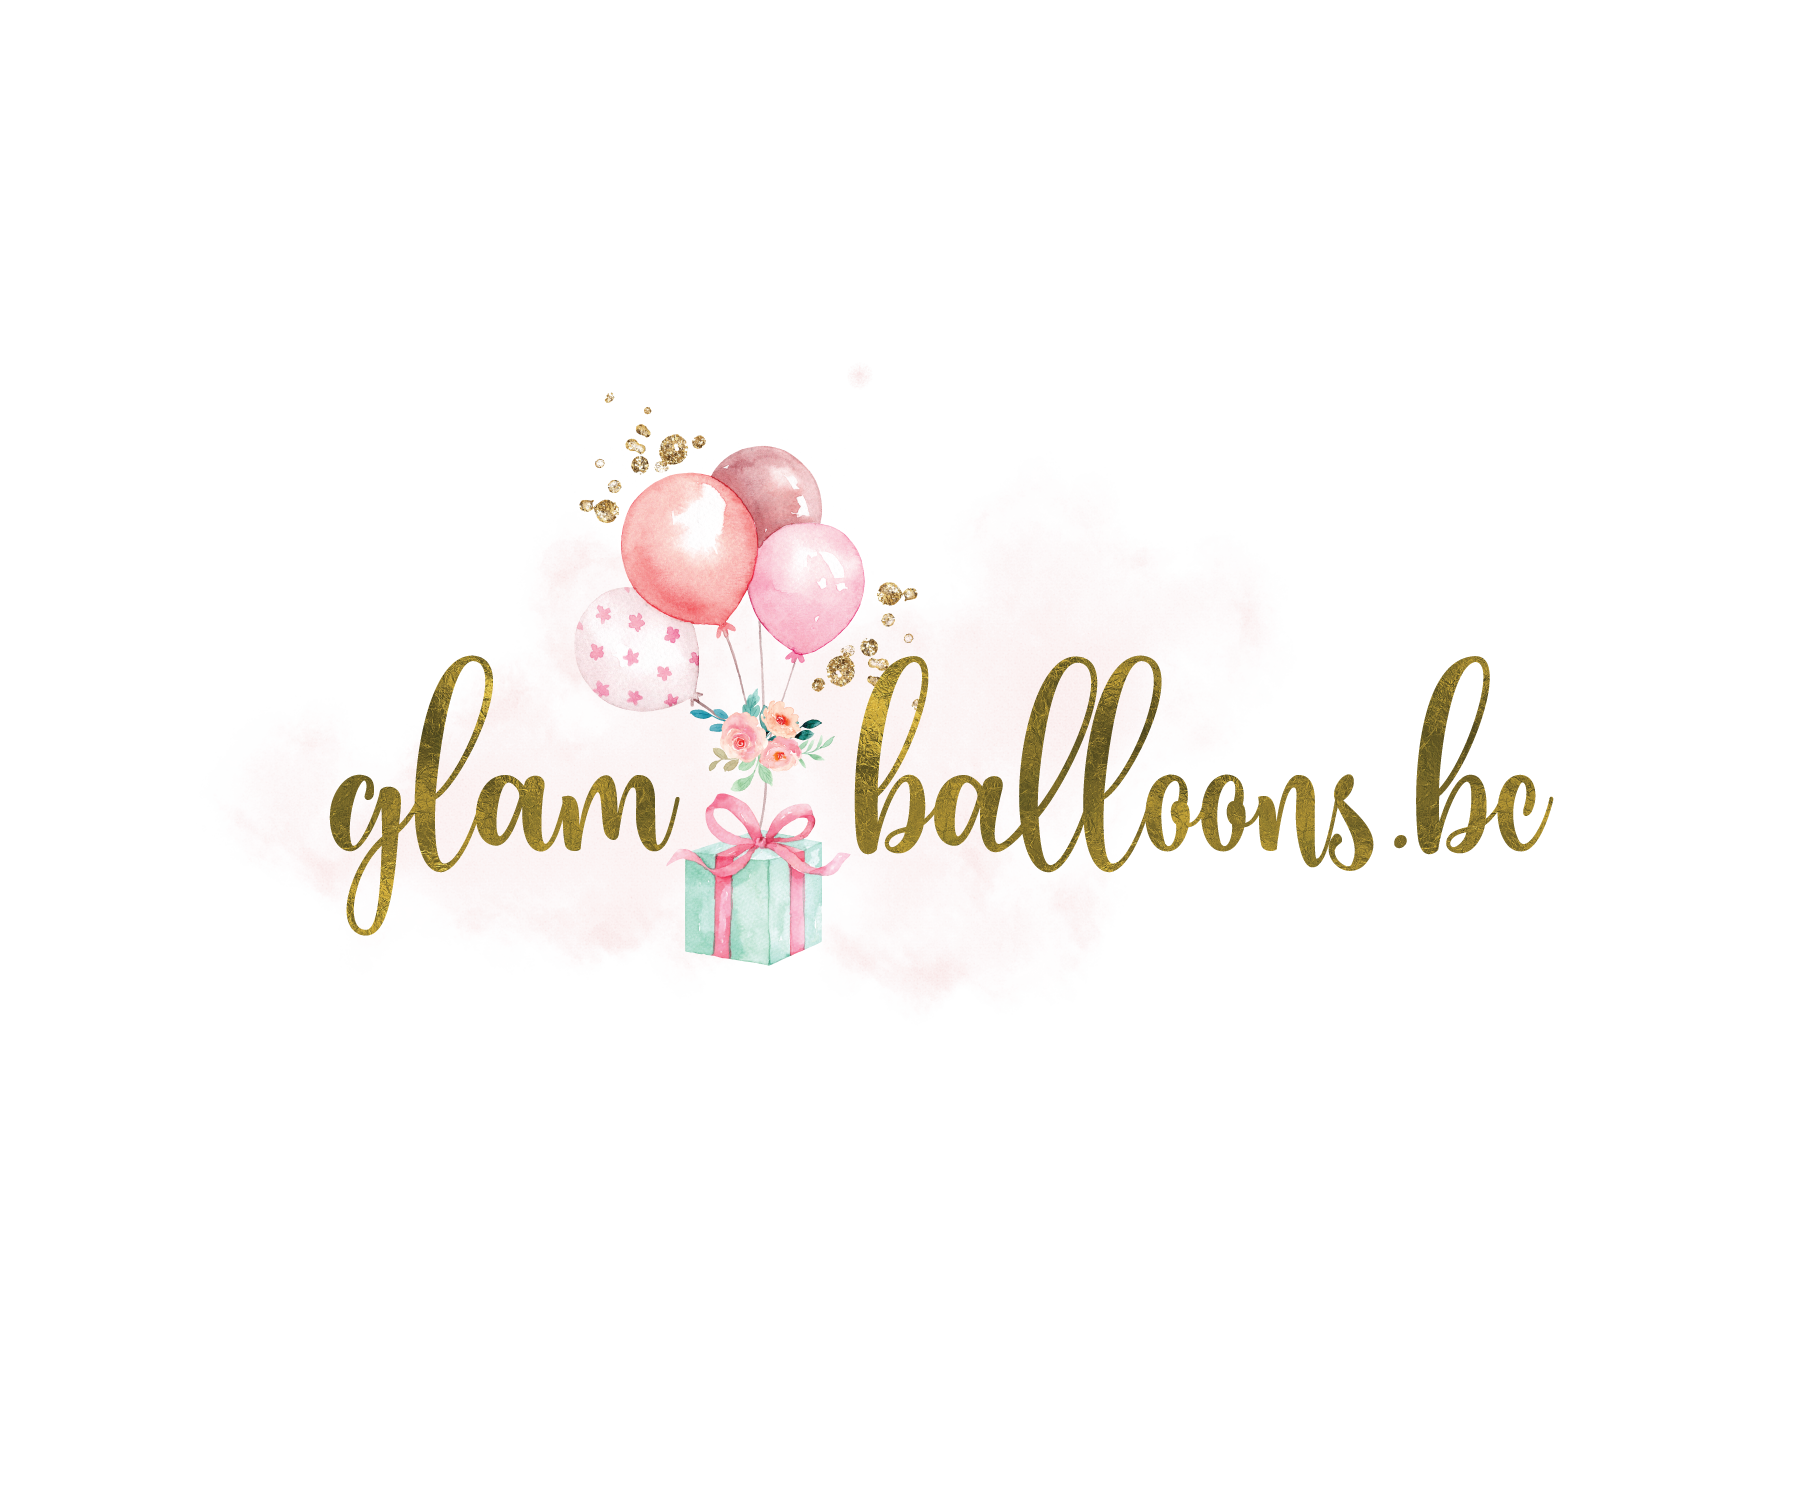 Shop Best Balloons in Canada - Glam Balloons